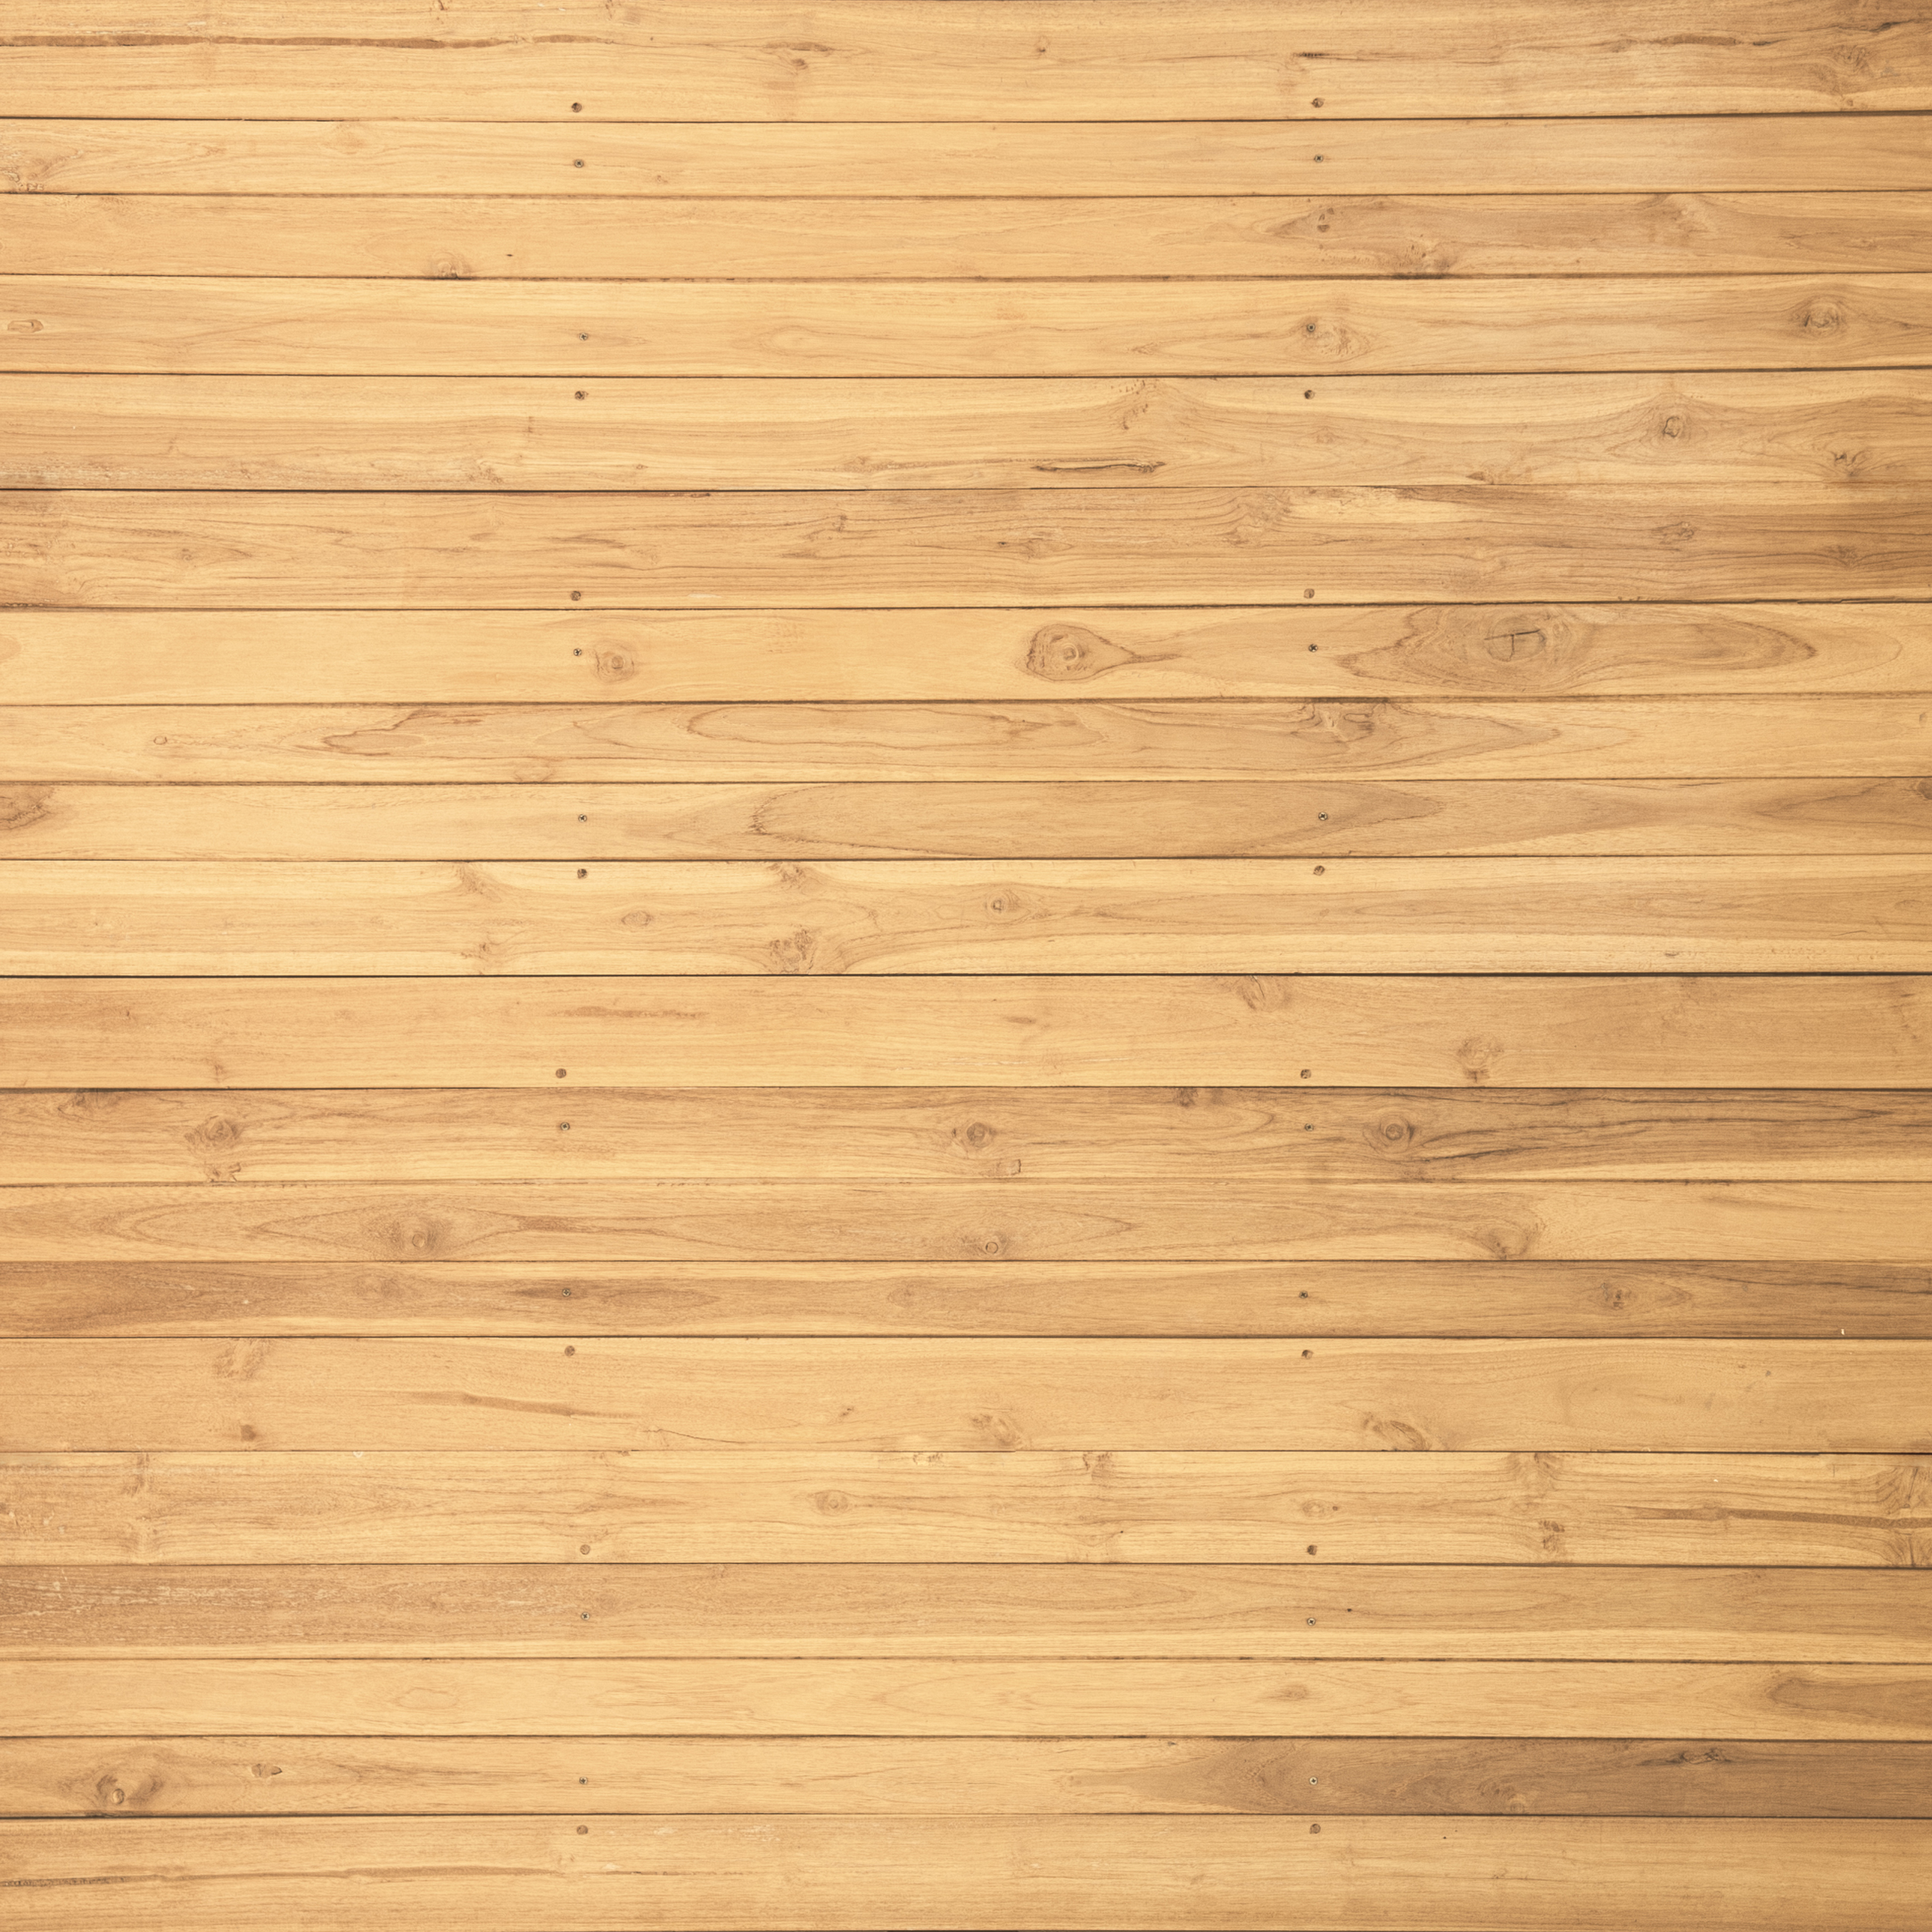 wooden flooring free stock photo of wood, building, construction, pattern XZLEXYL